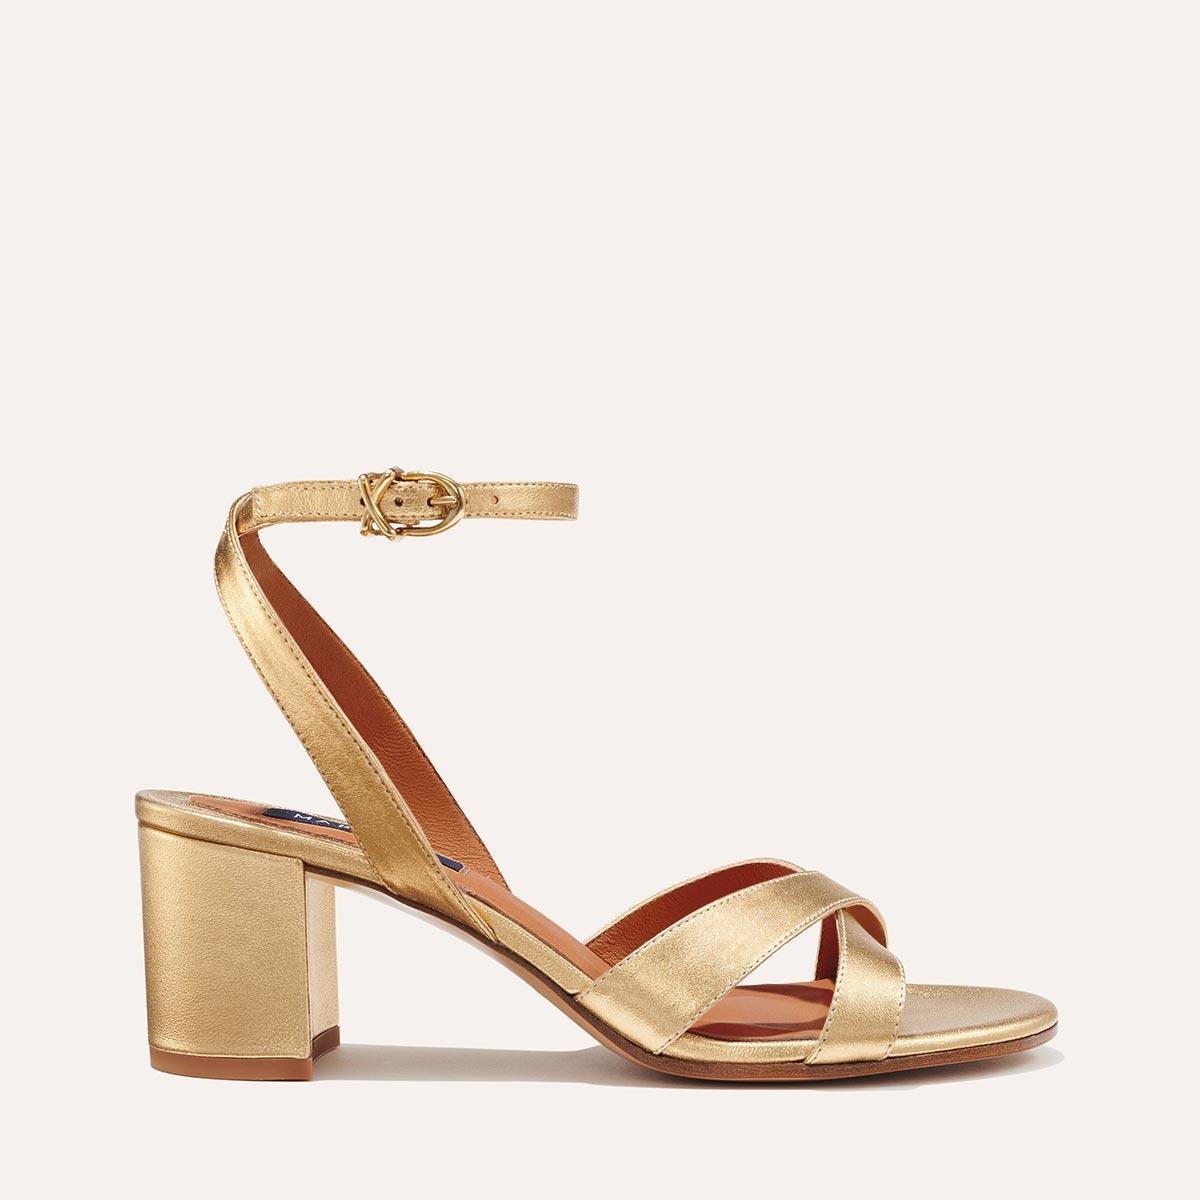 The City Sandal - Gold Nappa by MARGAUX